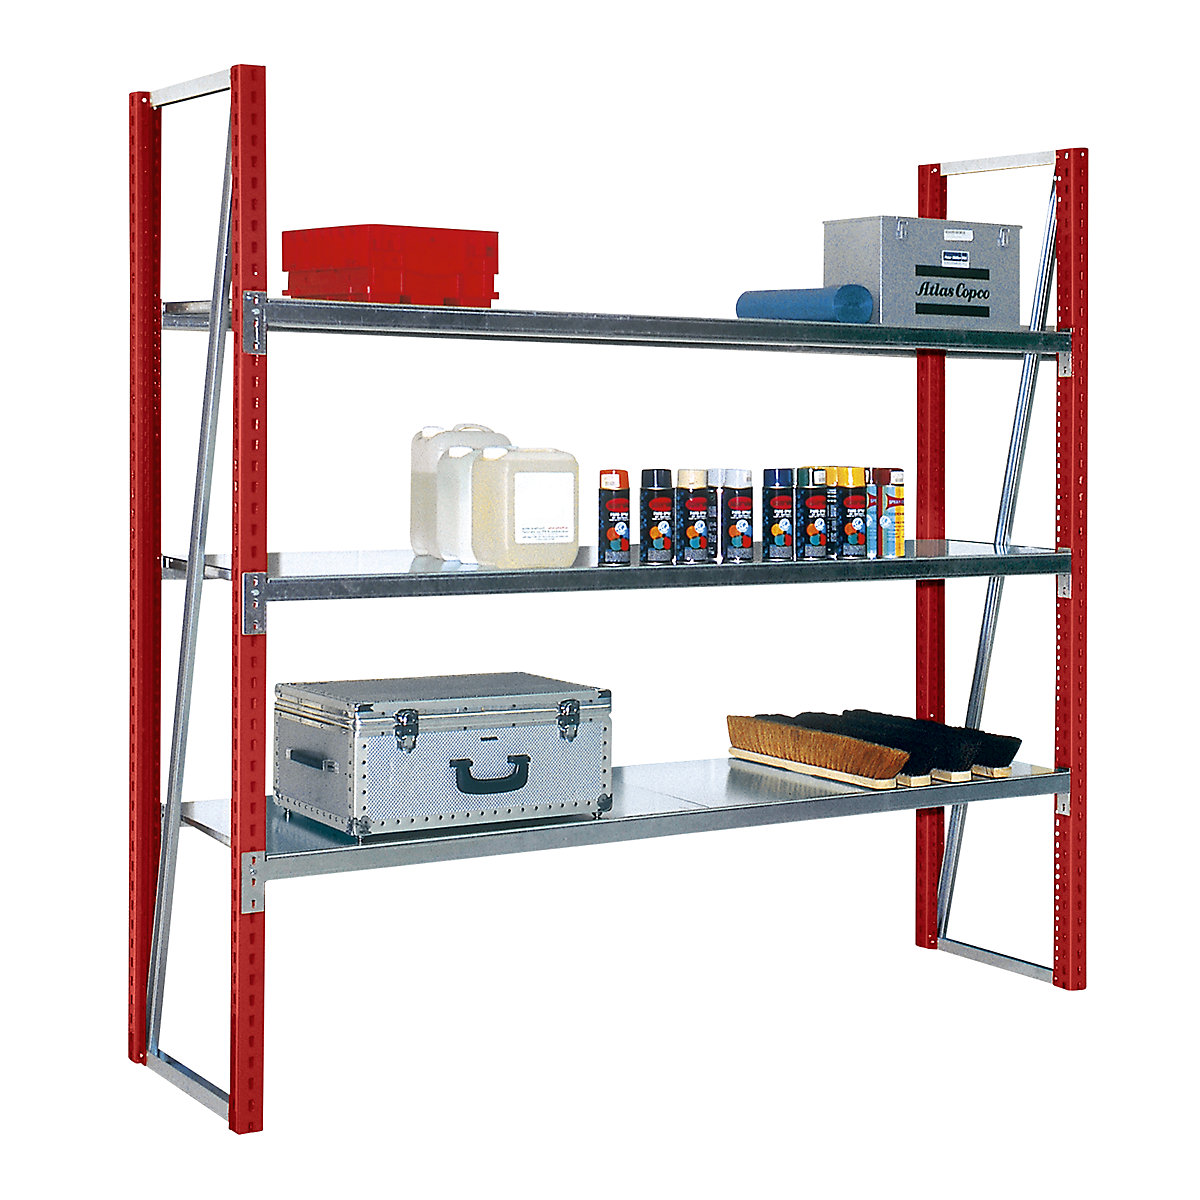 Wide span shelving, coloured – eurokraft pro, HxD 1990 x 800 mm, extension shelf unit, flame red RAL 3000